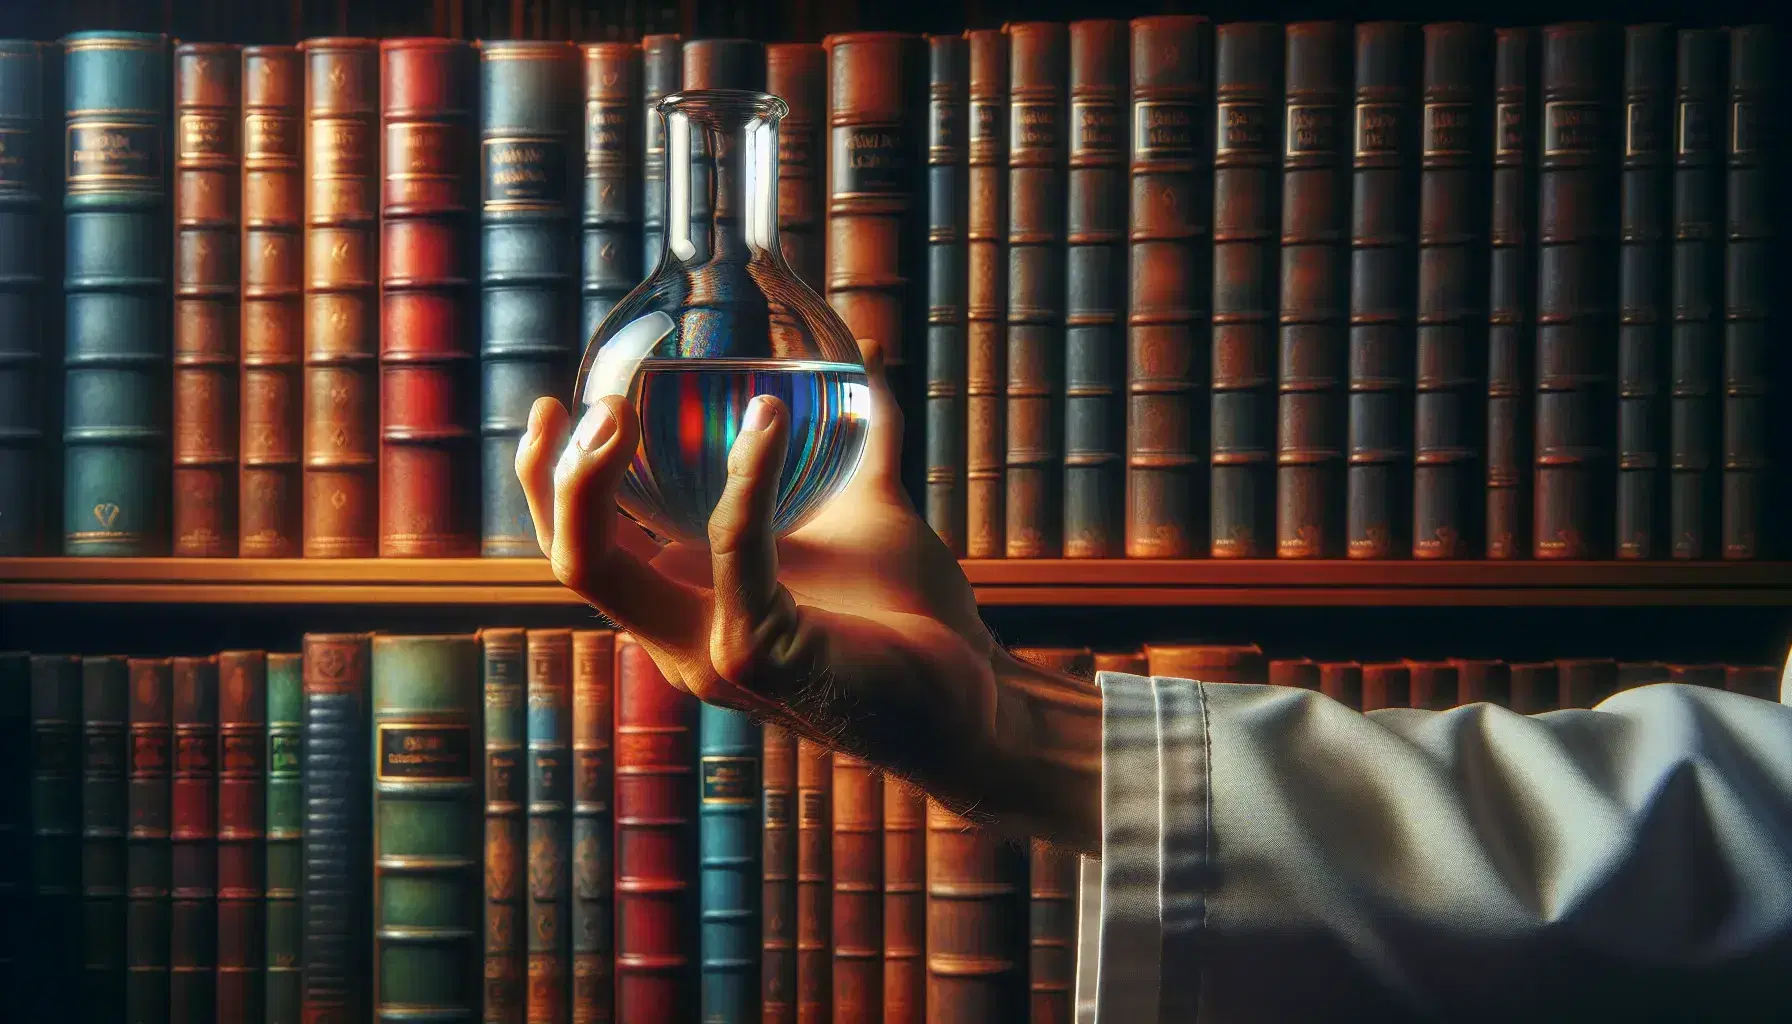 Scientist's hand holding a glass flask with clear liquid, reflecting light with colorful spectrum, against a blurred backdrop of multicolored books on a shelf.